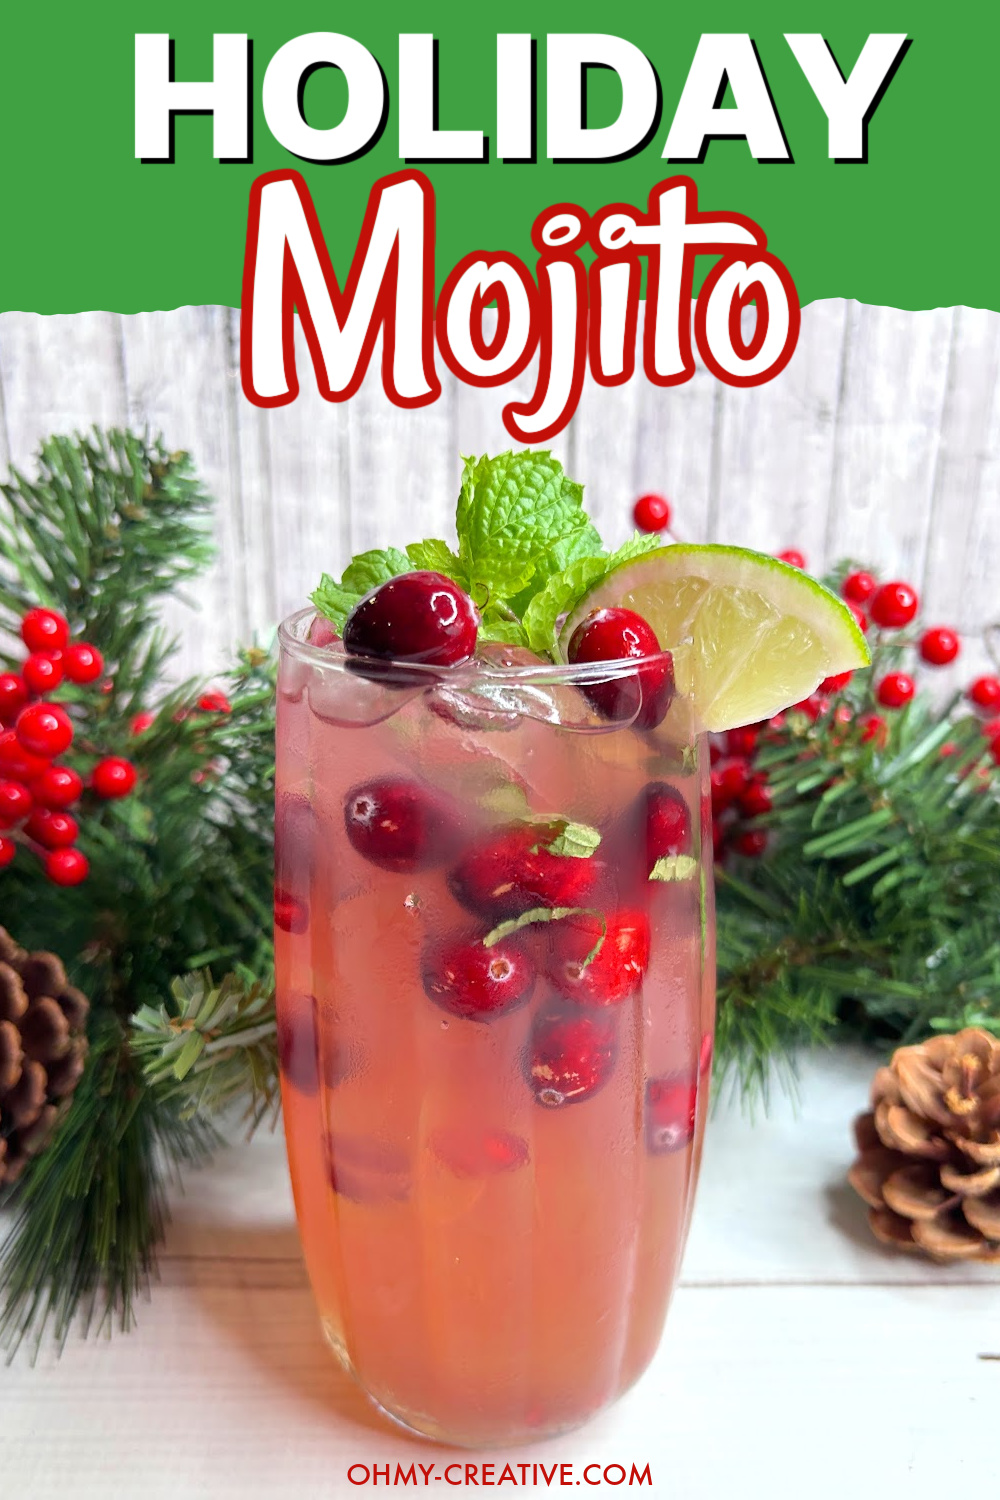 A pinterest image with a holiday mojito garnished with cranberries, mint and a wedge of lime. Winter greens are seen in the background.